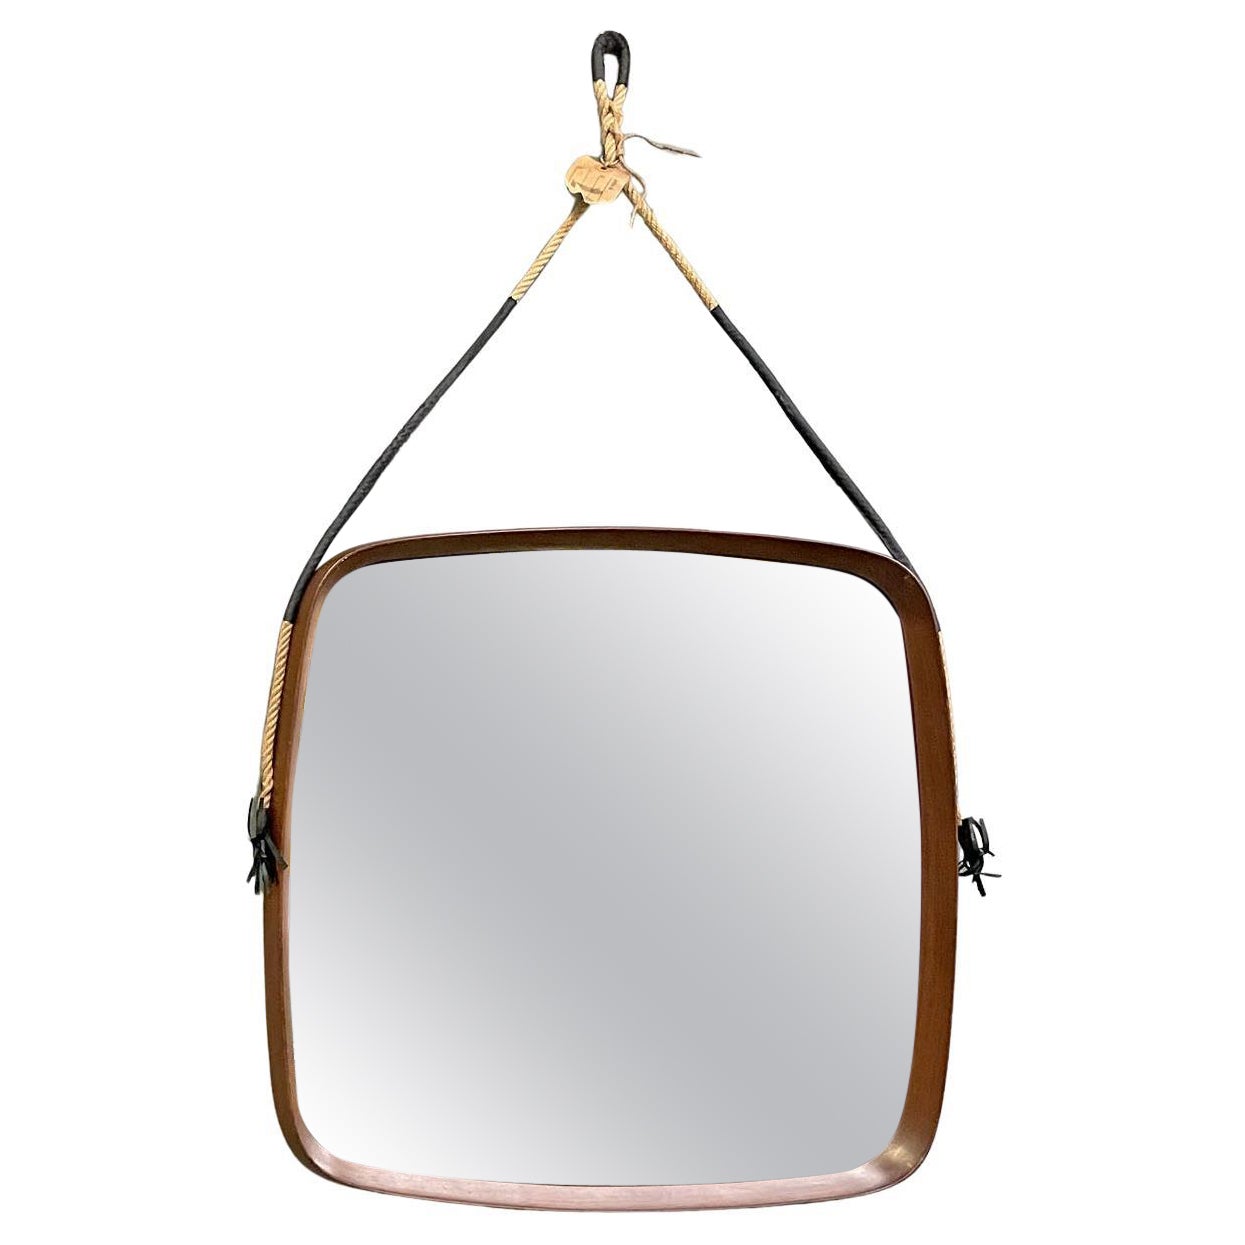 Italian mid-century modern squared wooden wall mirror with rope, 1960s For Sale